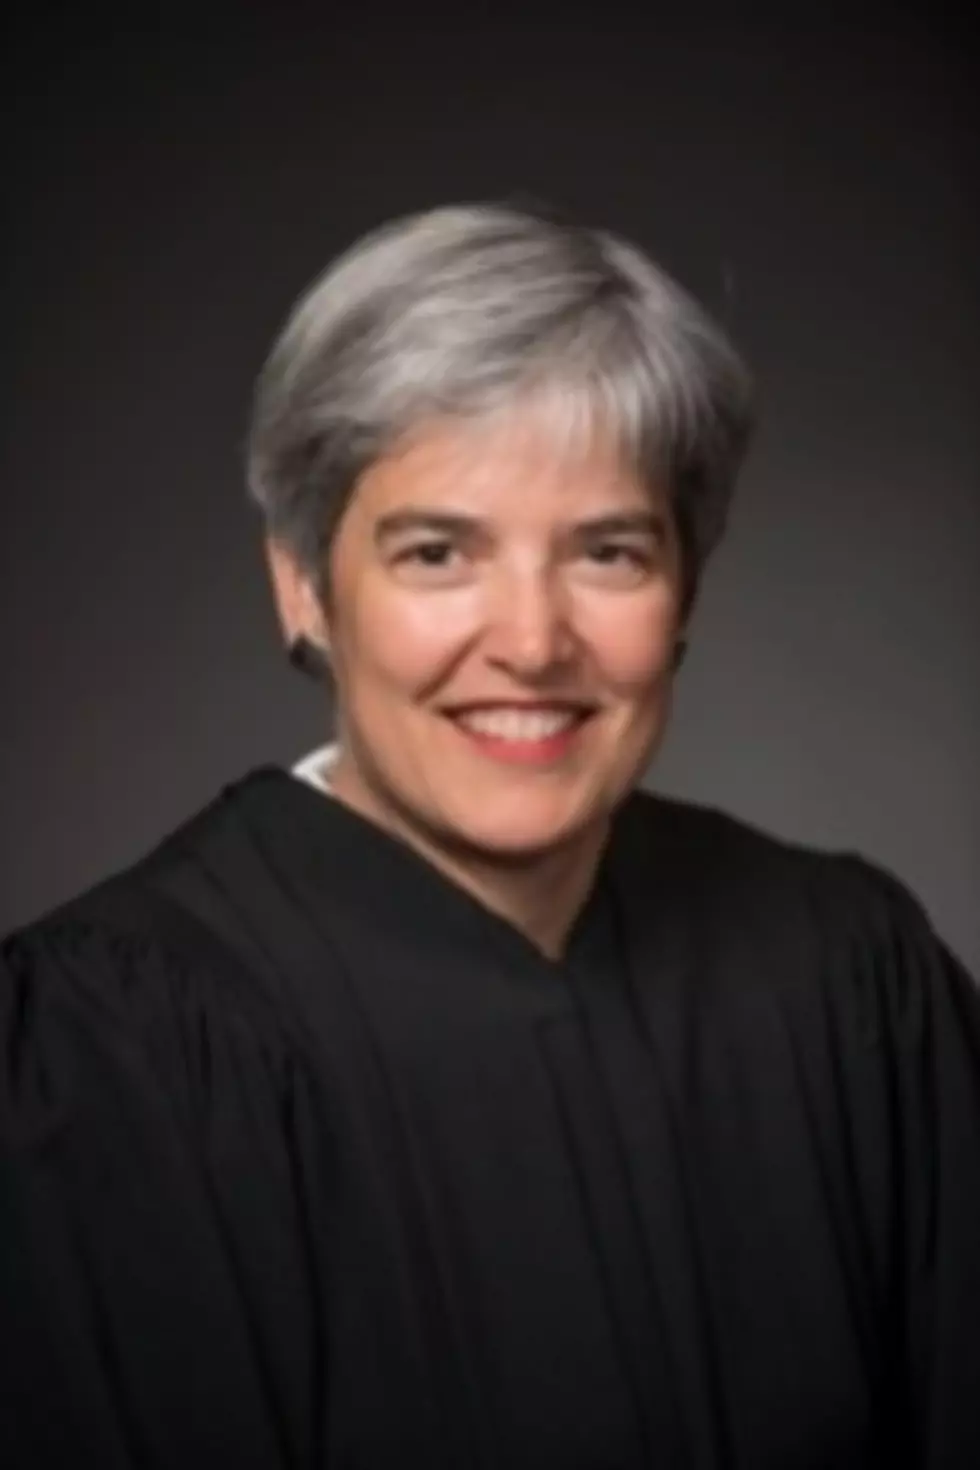 Governor Appoints First Openly Gay Supreme Court Justice